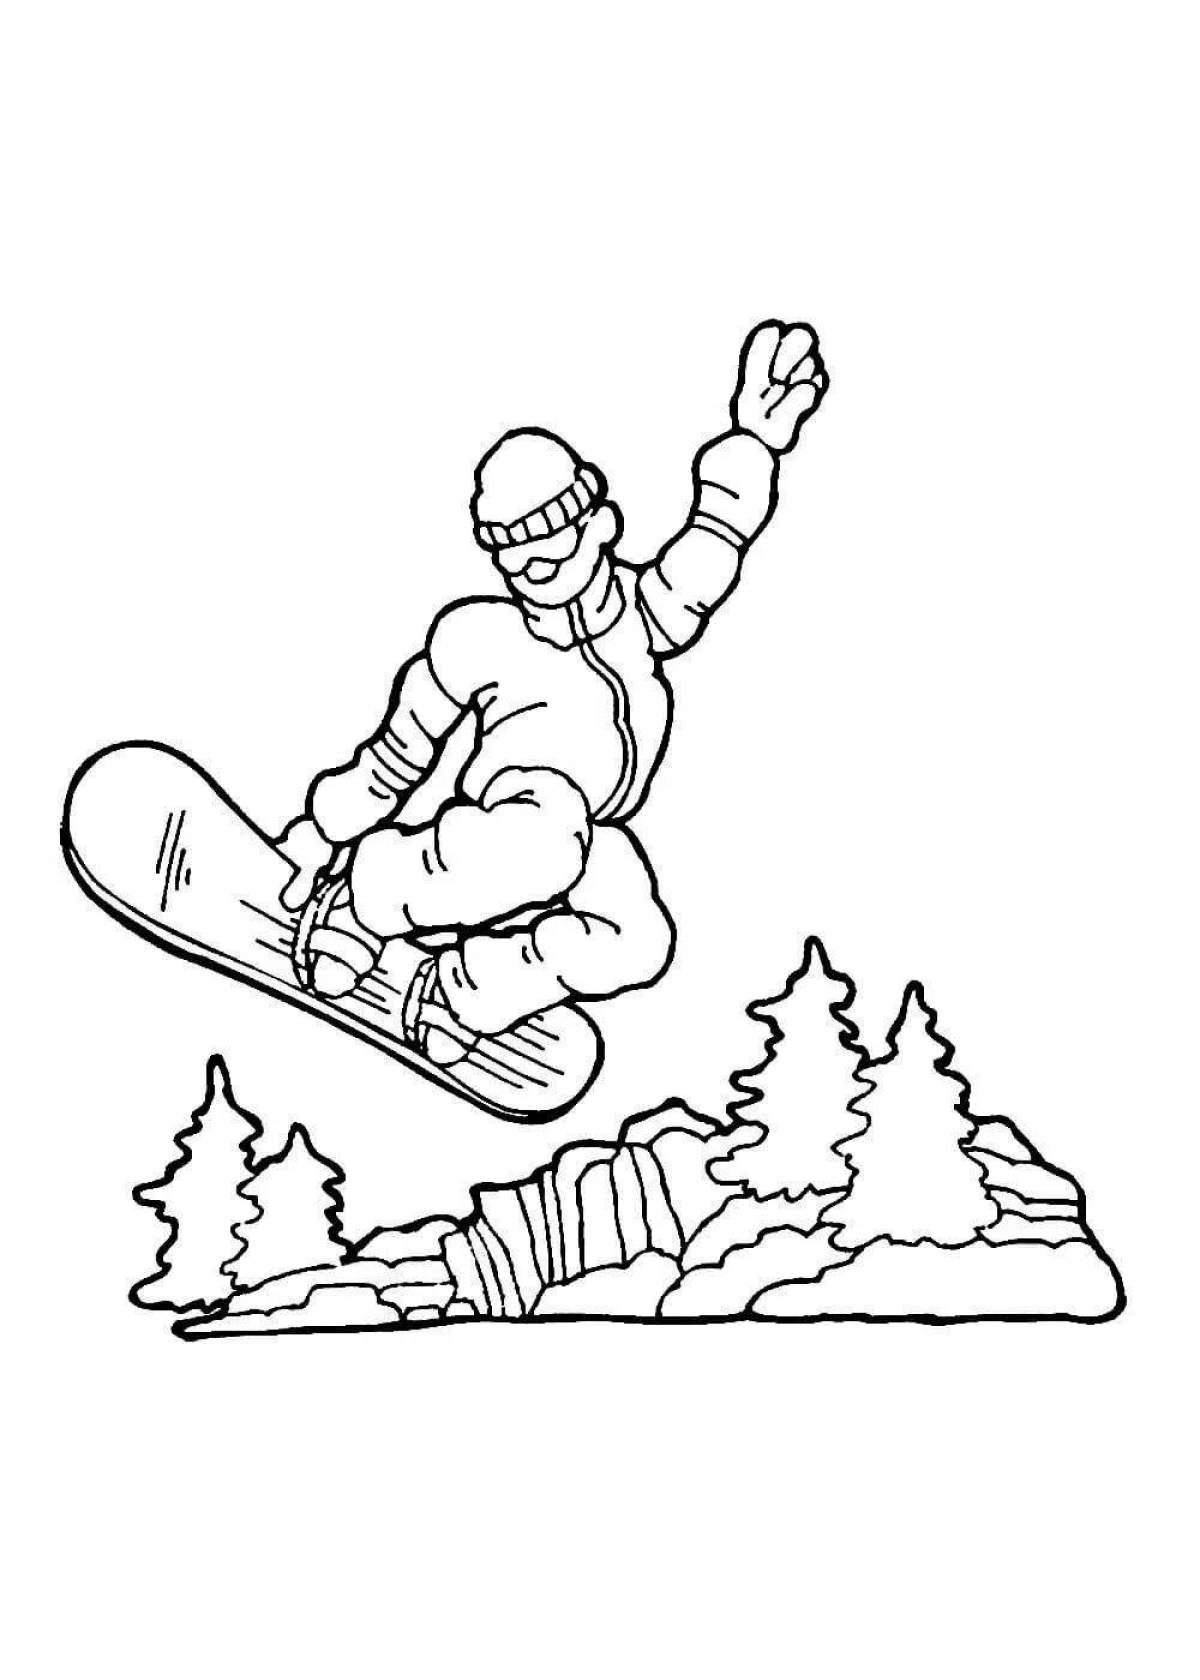 Colorful winter sports coloring page